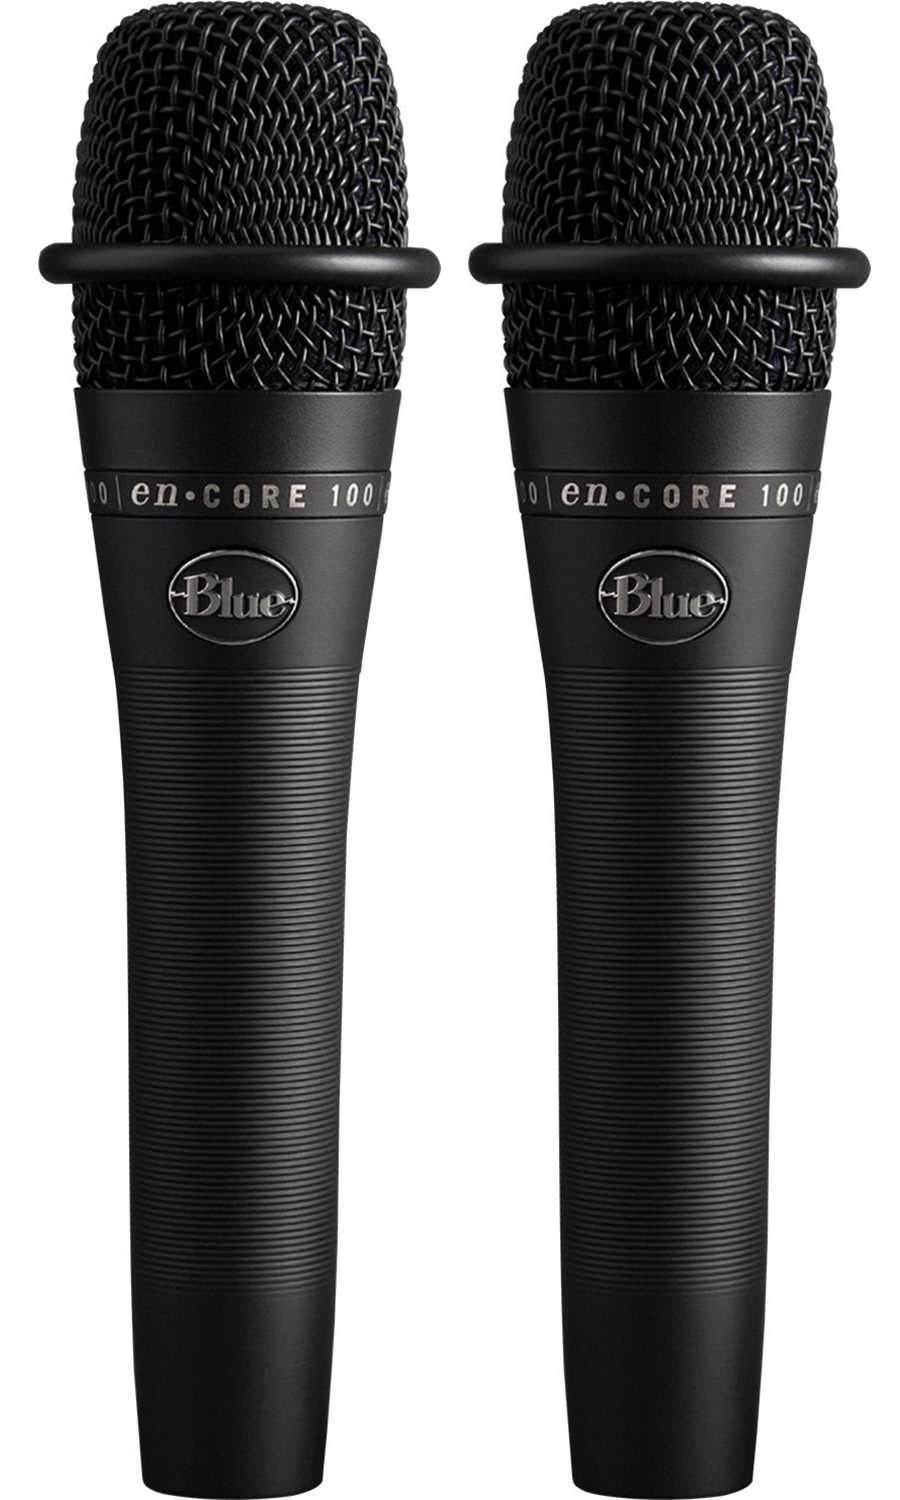 Blue enCore 100 Black Dynamic Handheld Microphone Pair - ProSound and Stage Lighting